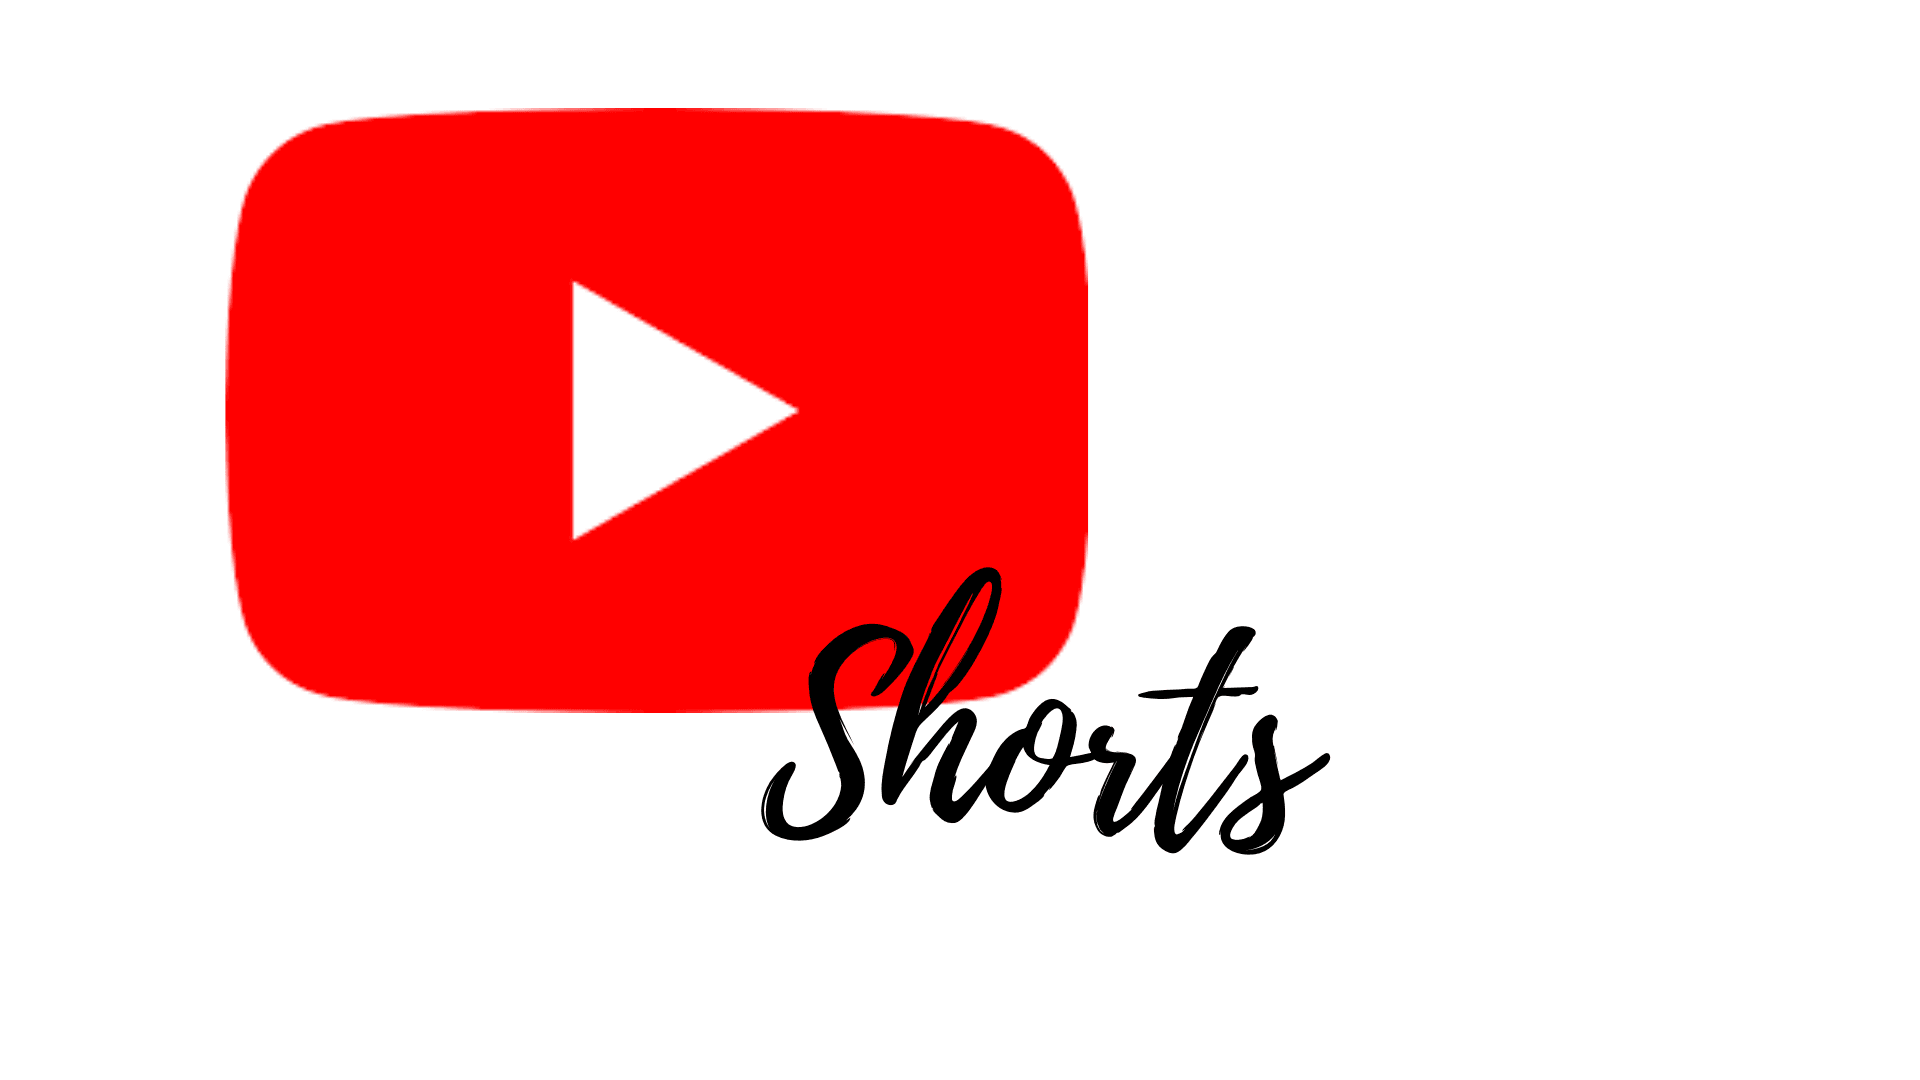 Youtube Shorts Coming Soon To Compete With TikTok